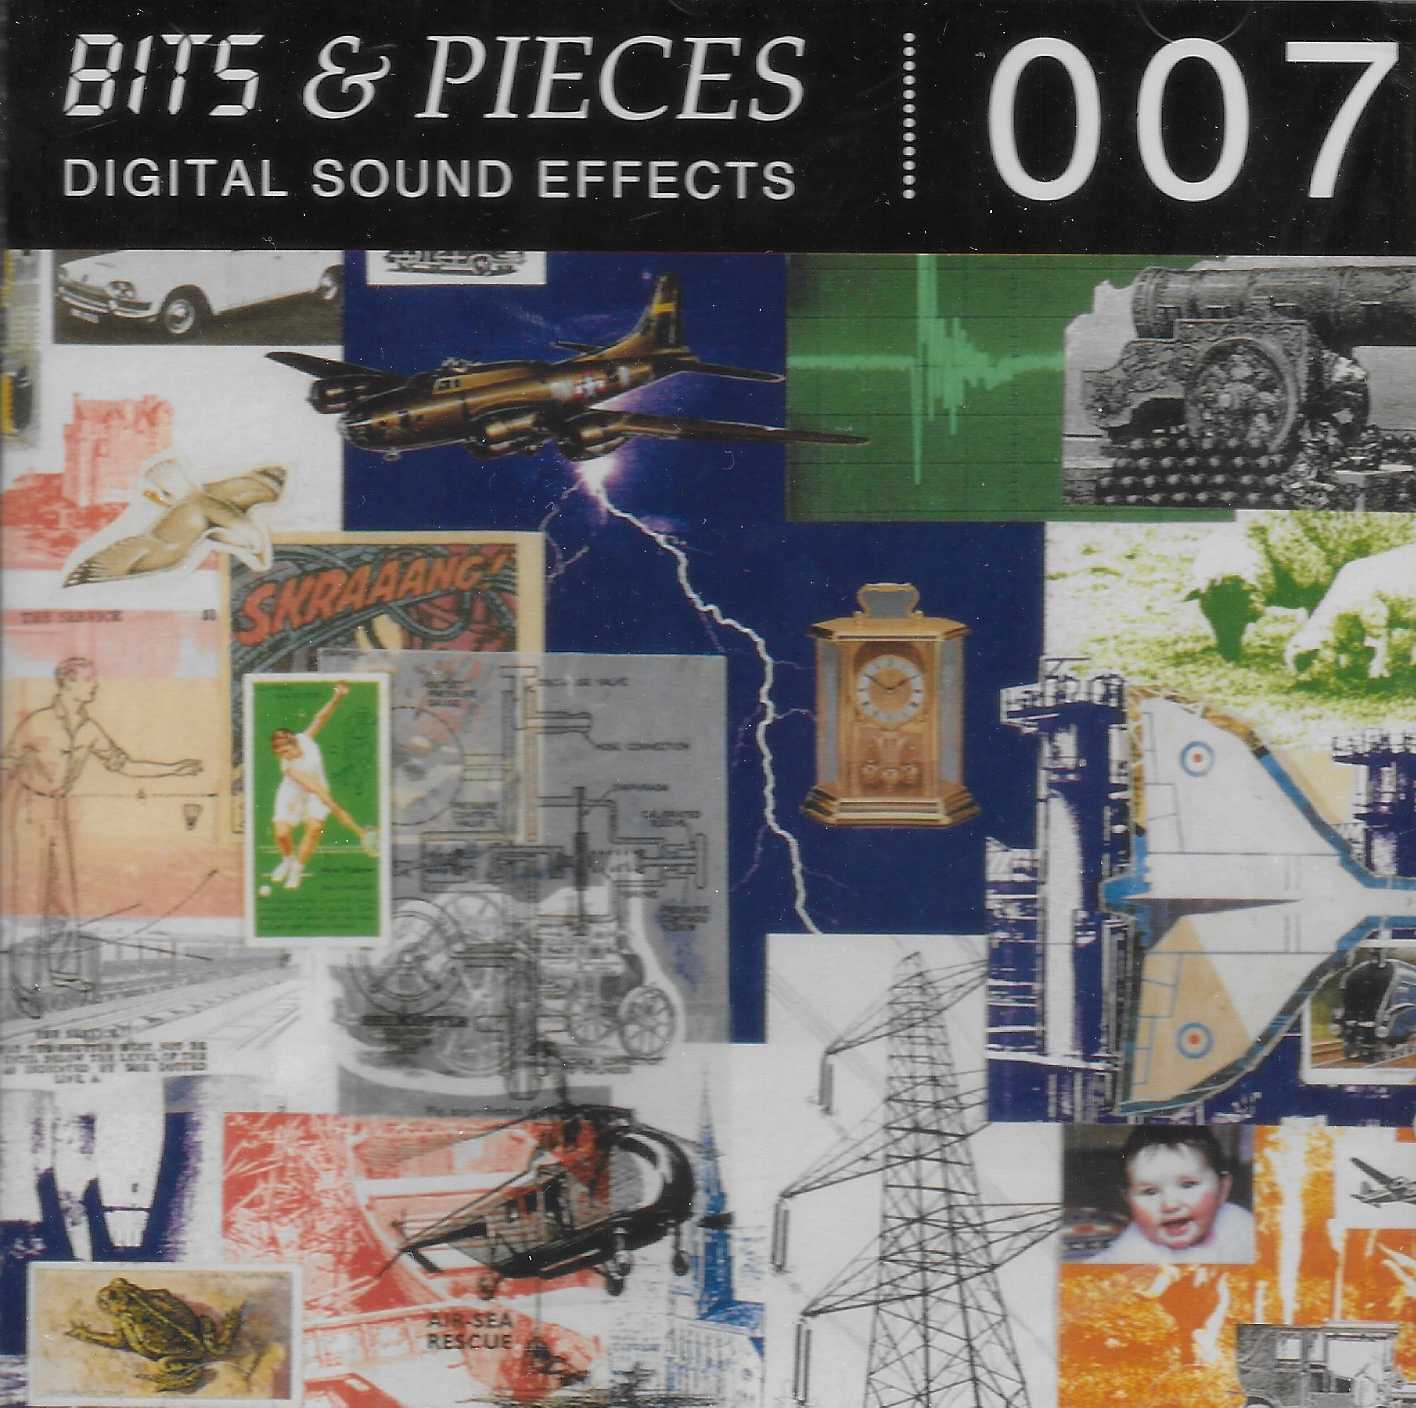 Picture of Bits & pieces digital sound effects 007 by artist Various from ITV, Channel 4 and Channel 5 cds library